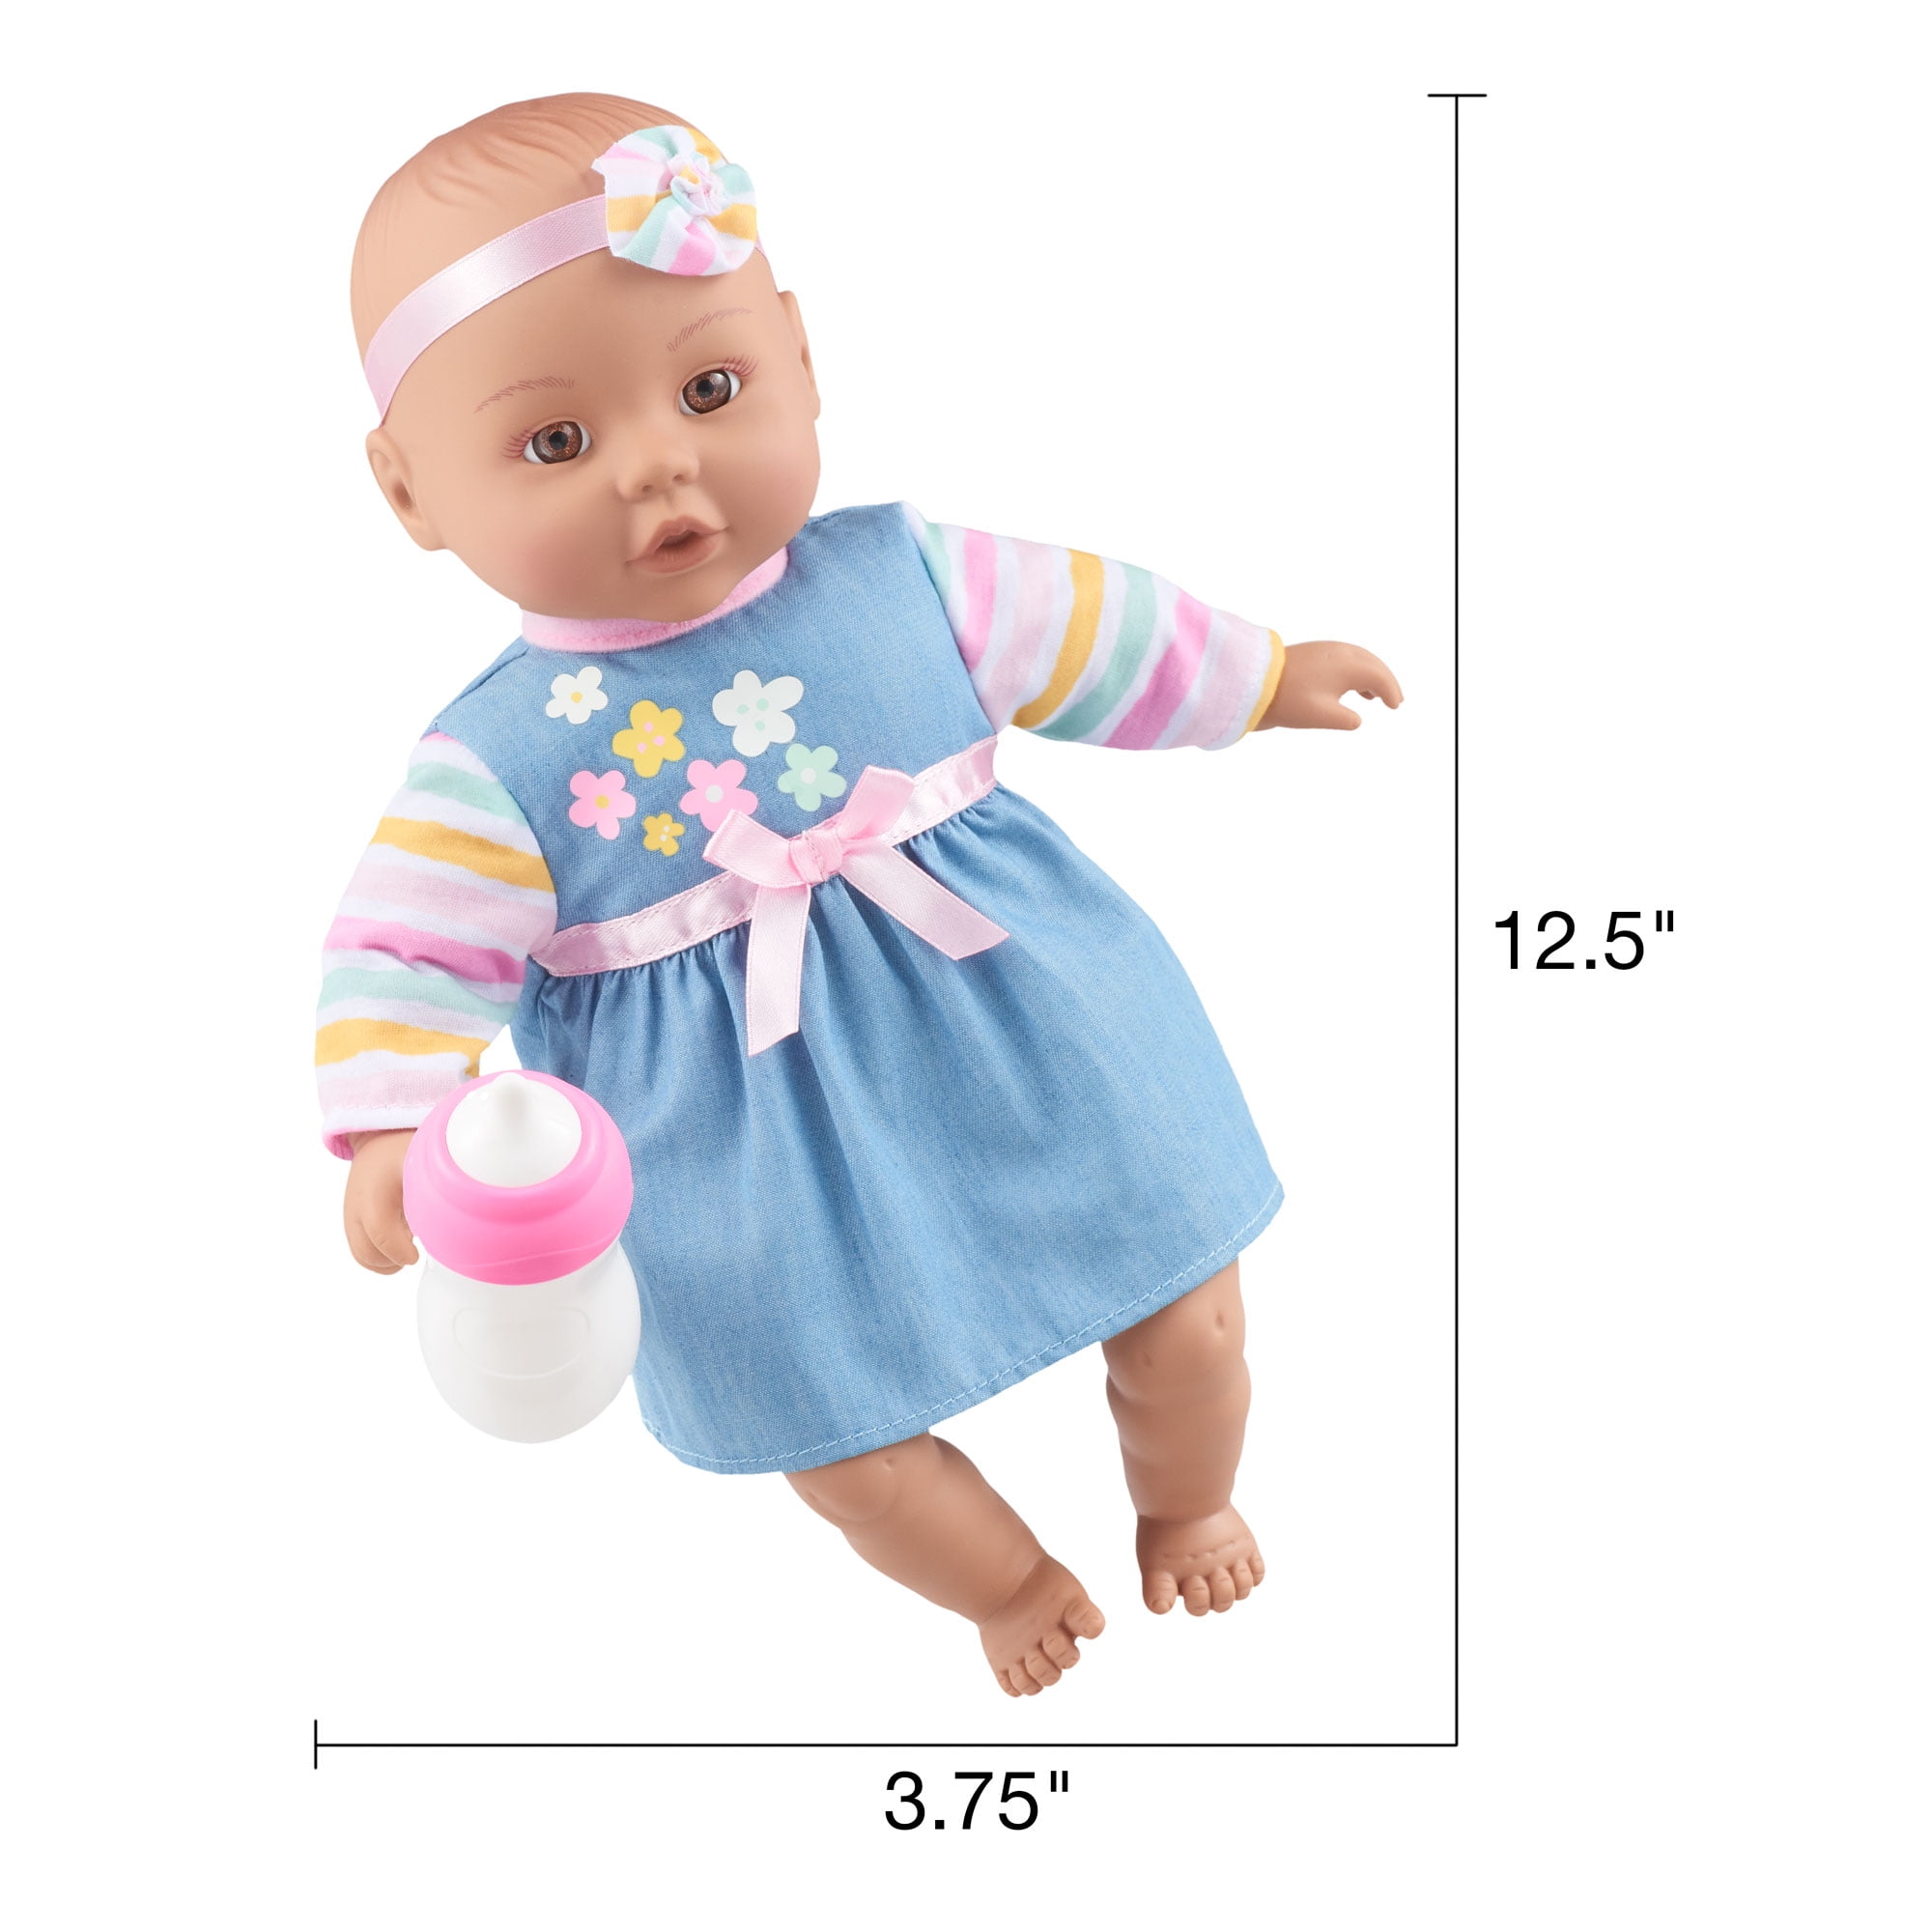 Sweet Love Snuggle & Feed Time 12.5-Inch Baby Doll with Blue Outfit Walmart.com